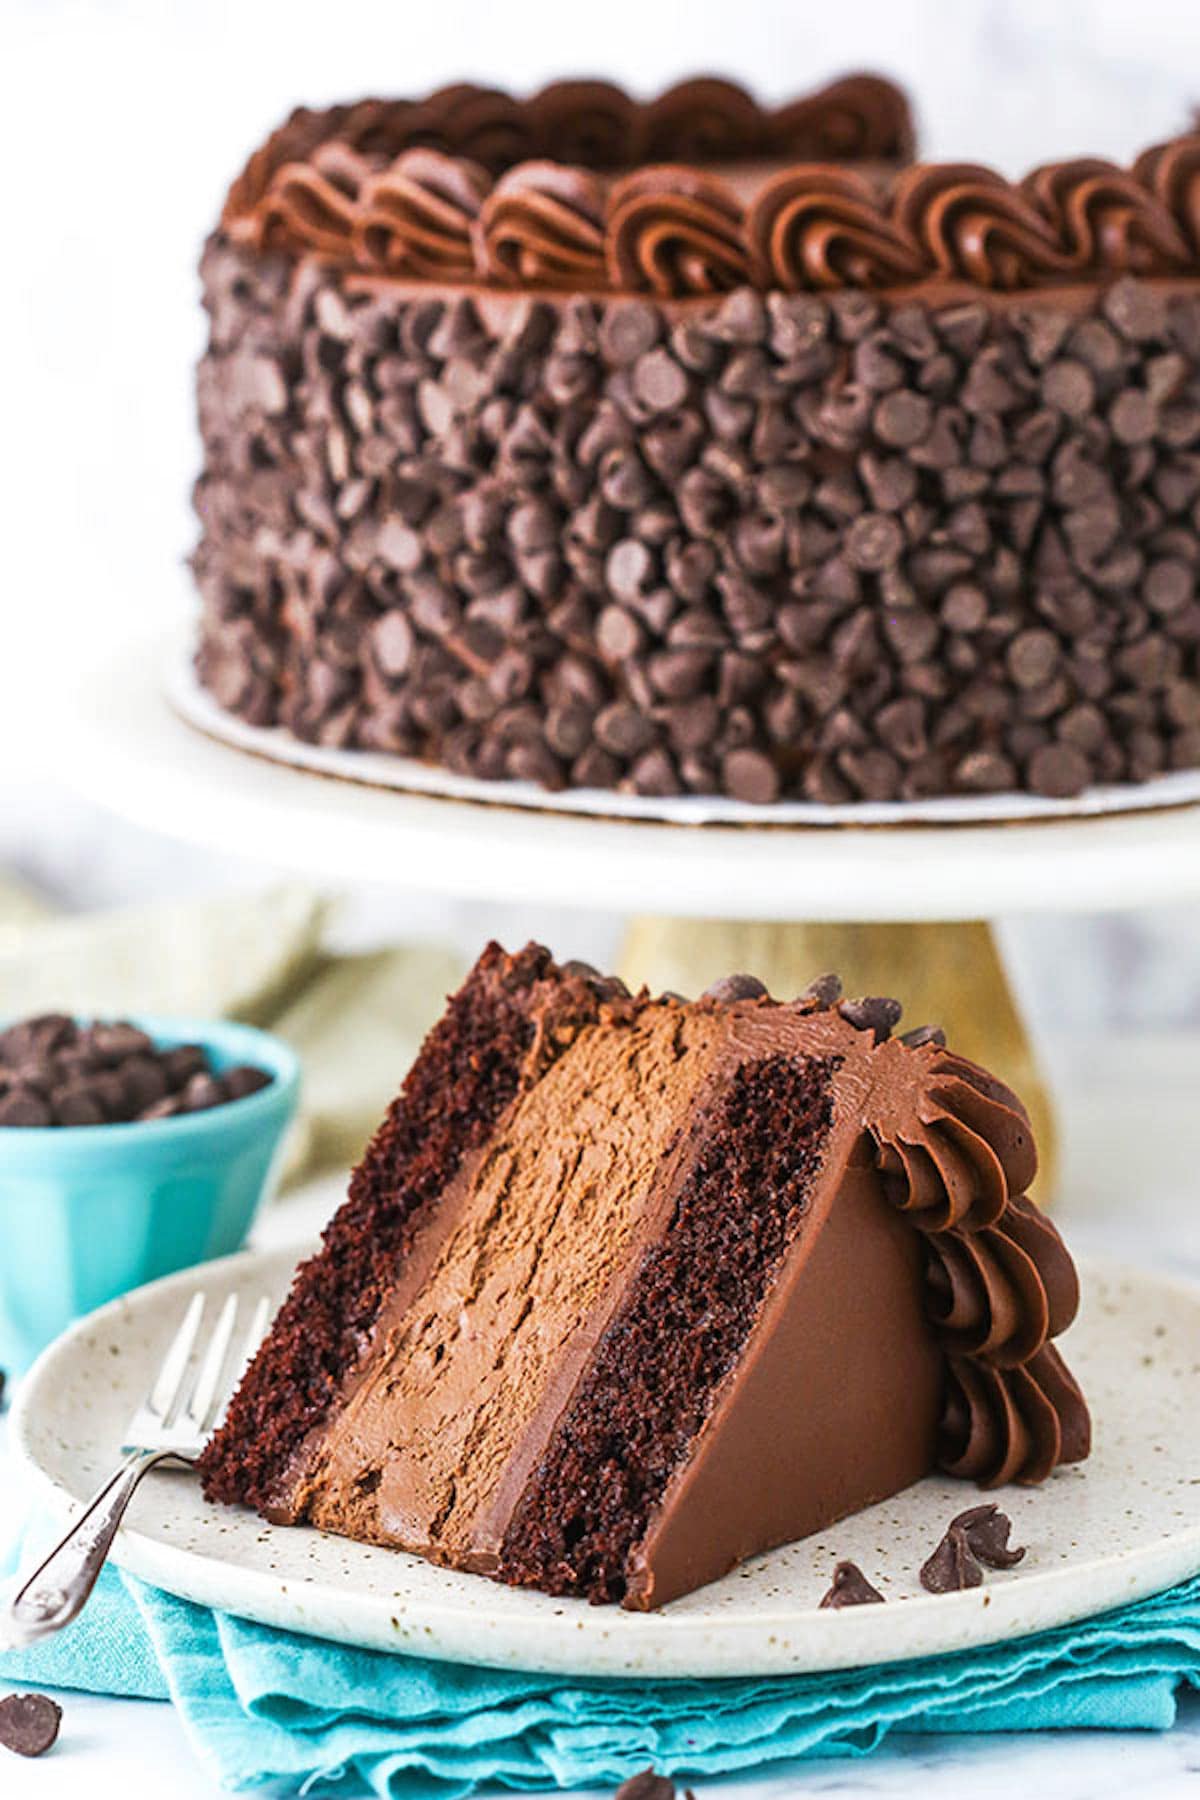 A Slice of Chocolate Layer Cake Next to the Rest of the Cake on a Cake Stand